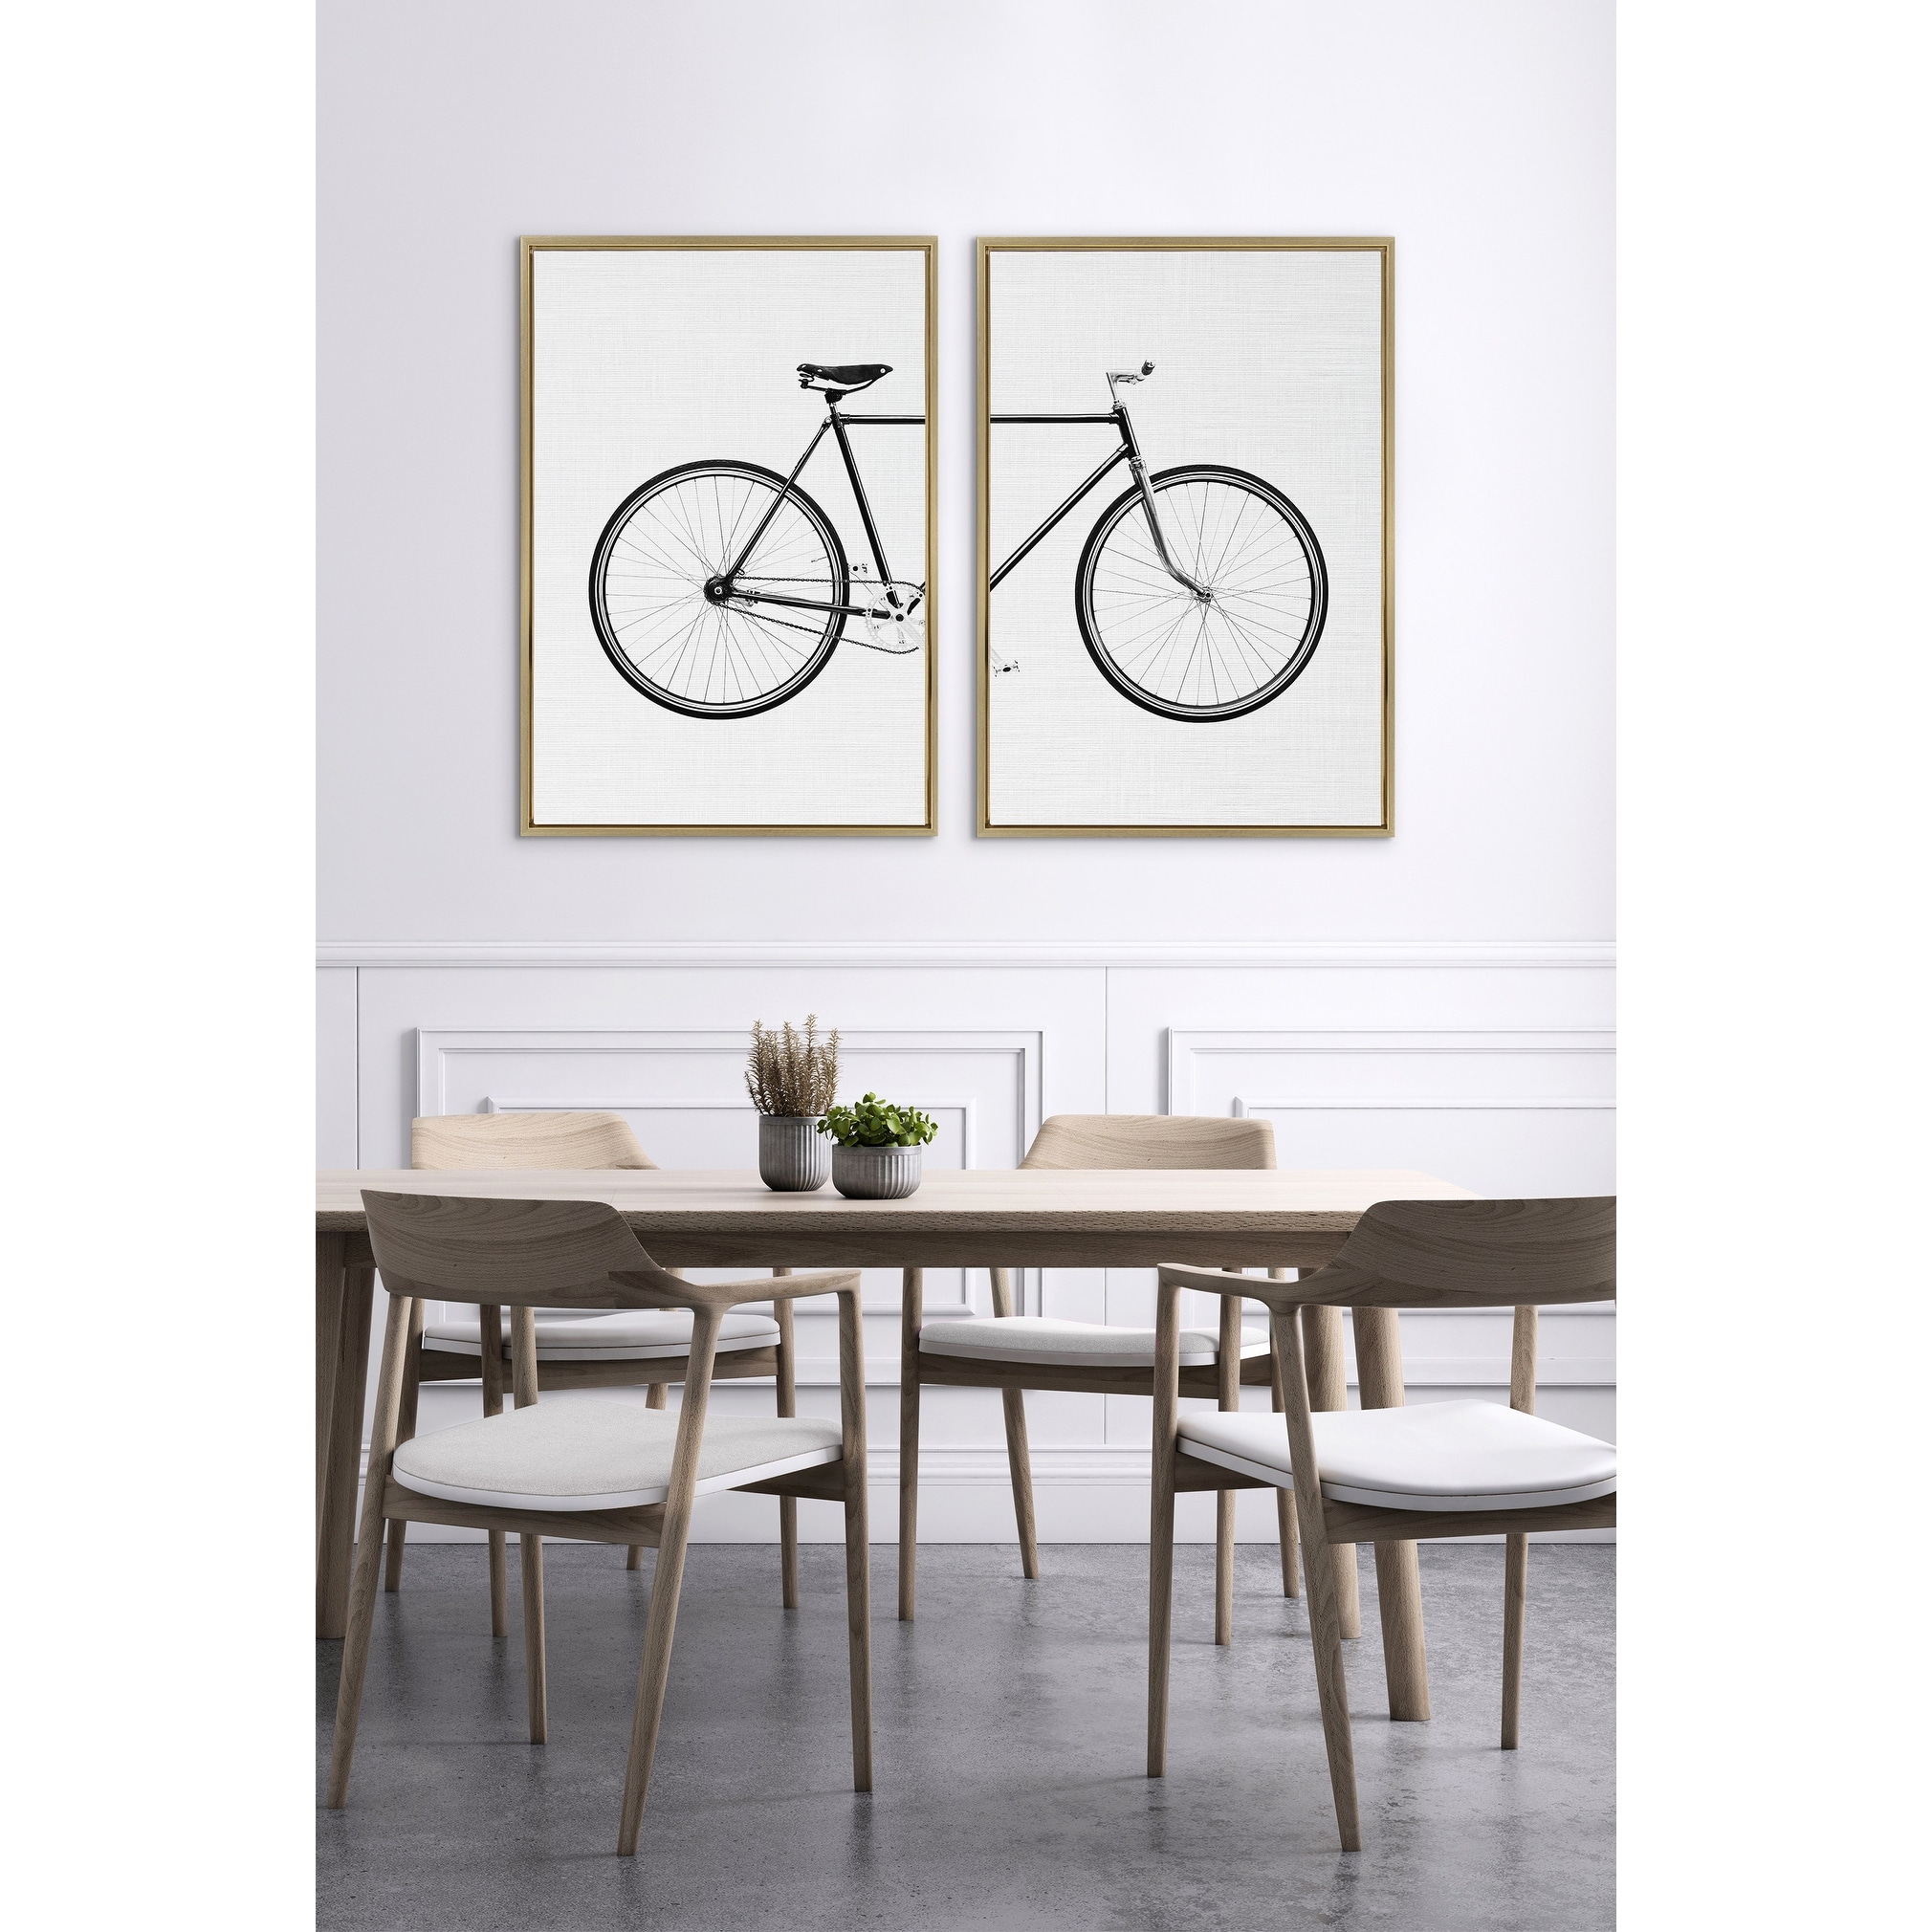 Kate and Laurel Sylvie Bicycle Canvas by Simon Te of Tai Prints On Sale  Bed Bath  Beyond 30962735